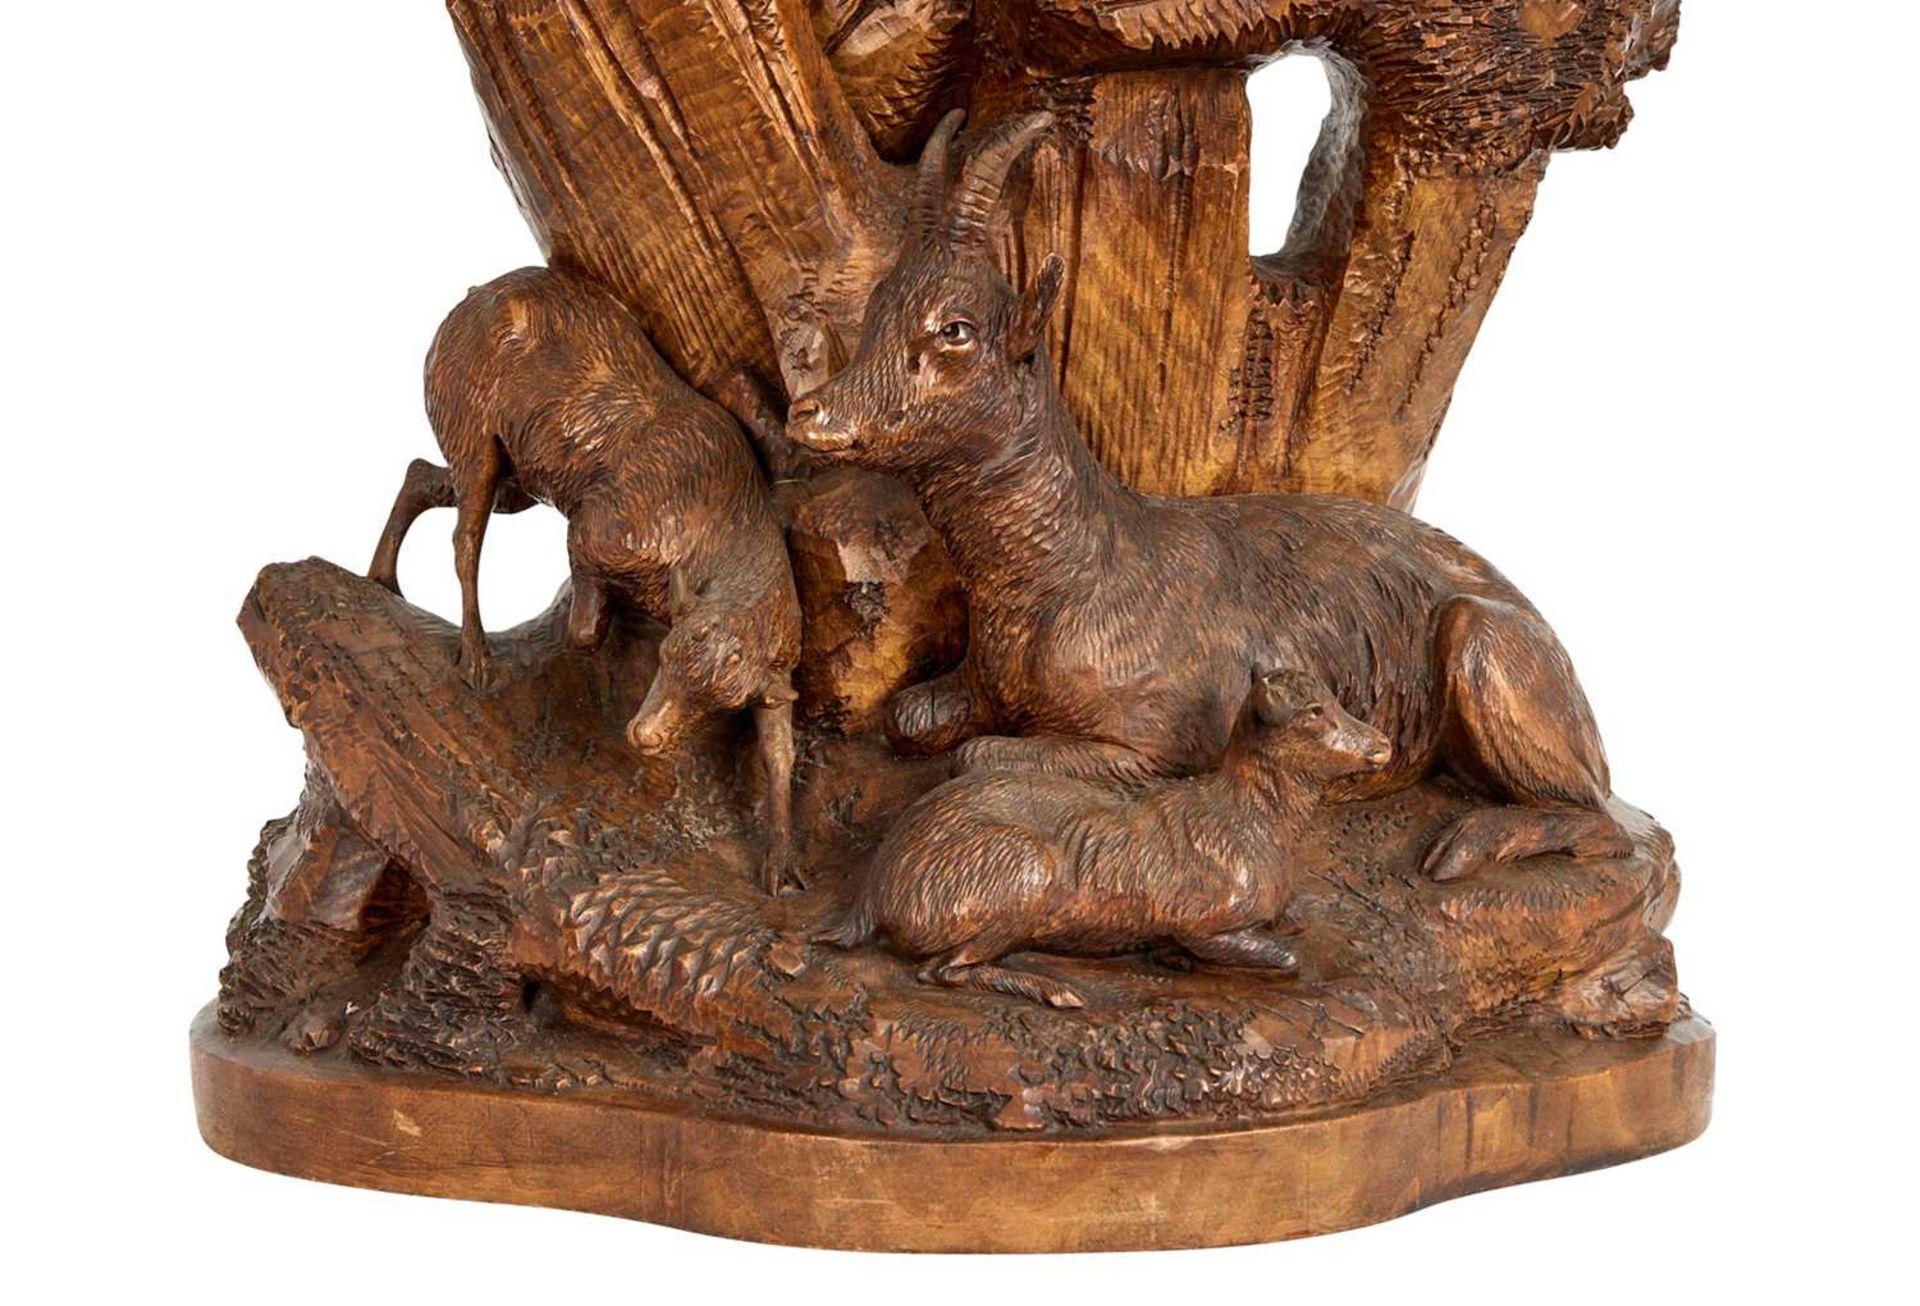 A LARGE LATE 19TH CENTURY BLACK FOREST CARVED LINDENWOOD GROUP OF IBEXES - Image 4 of 5